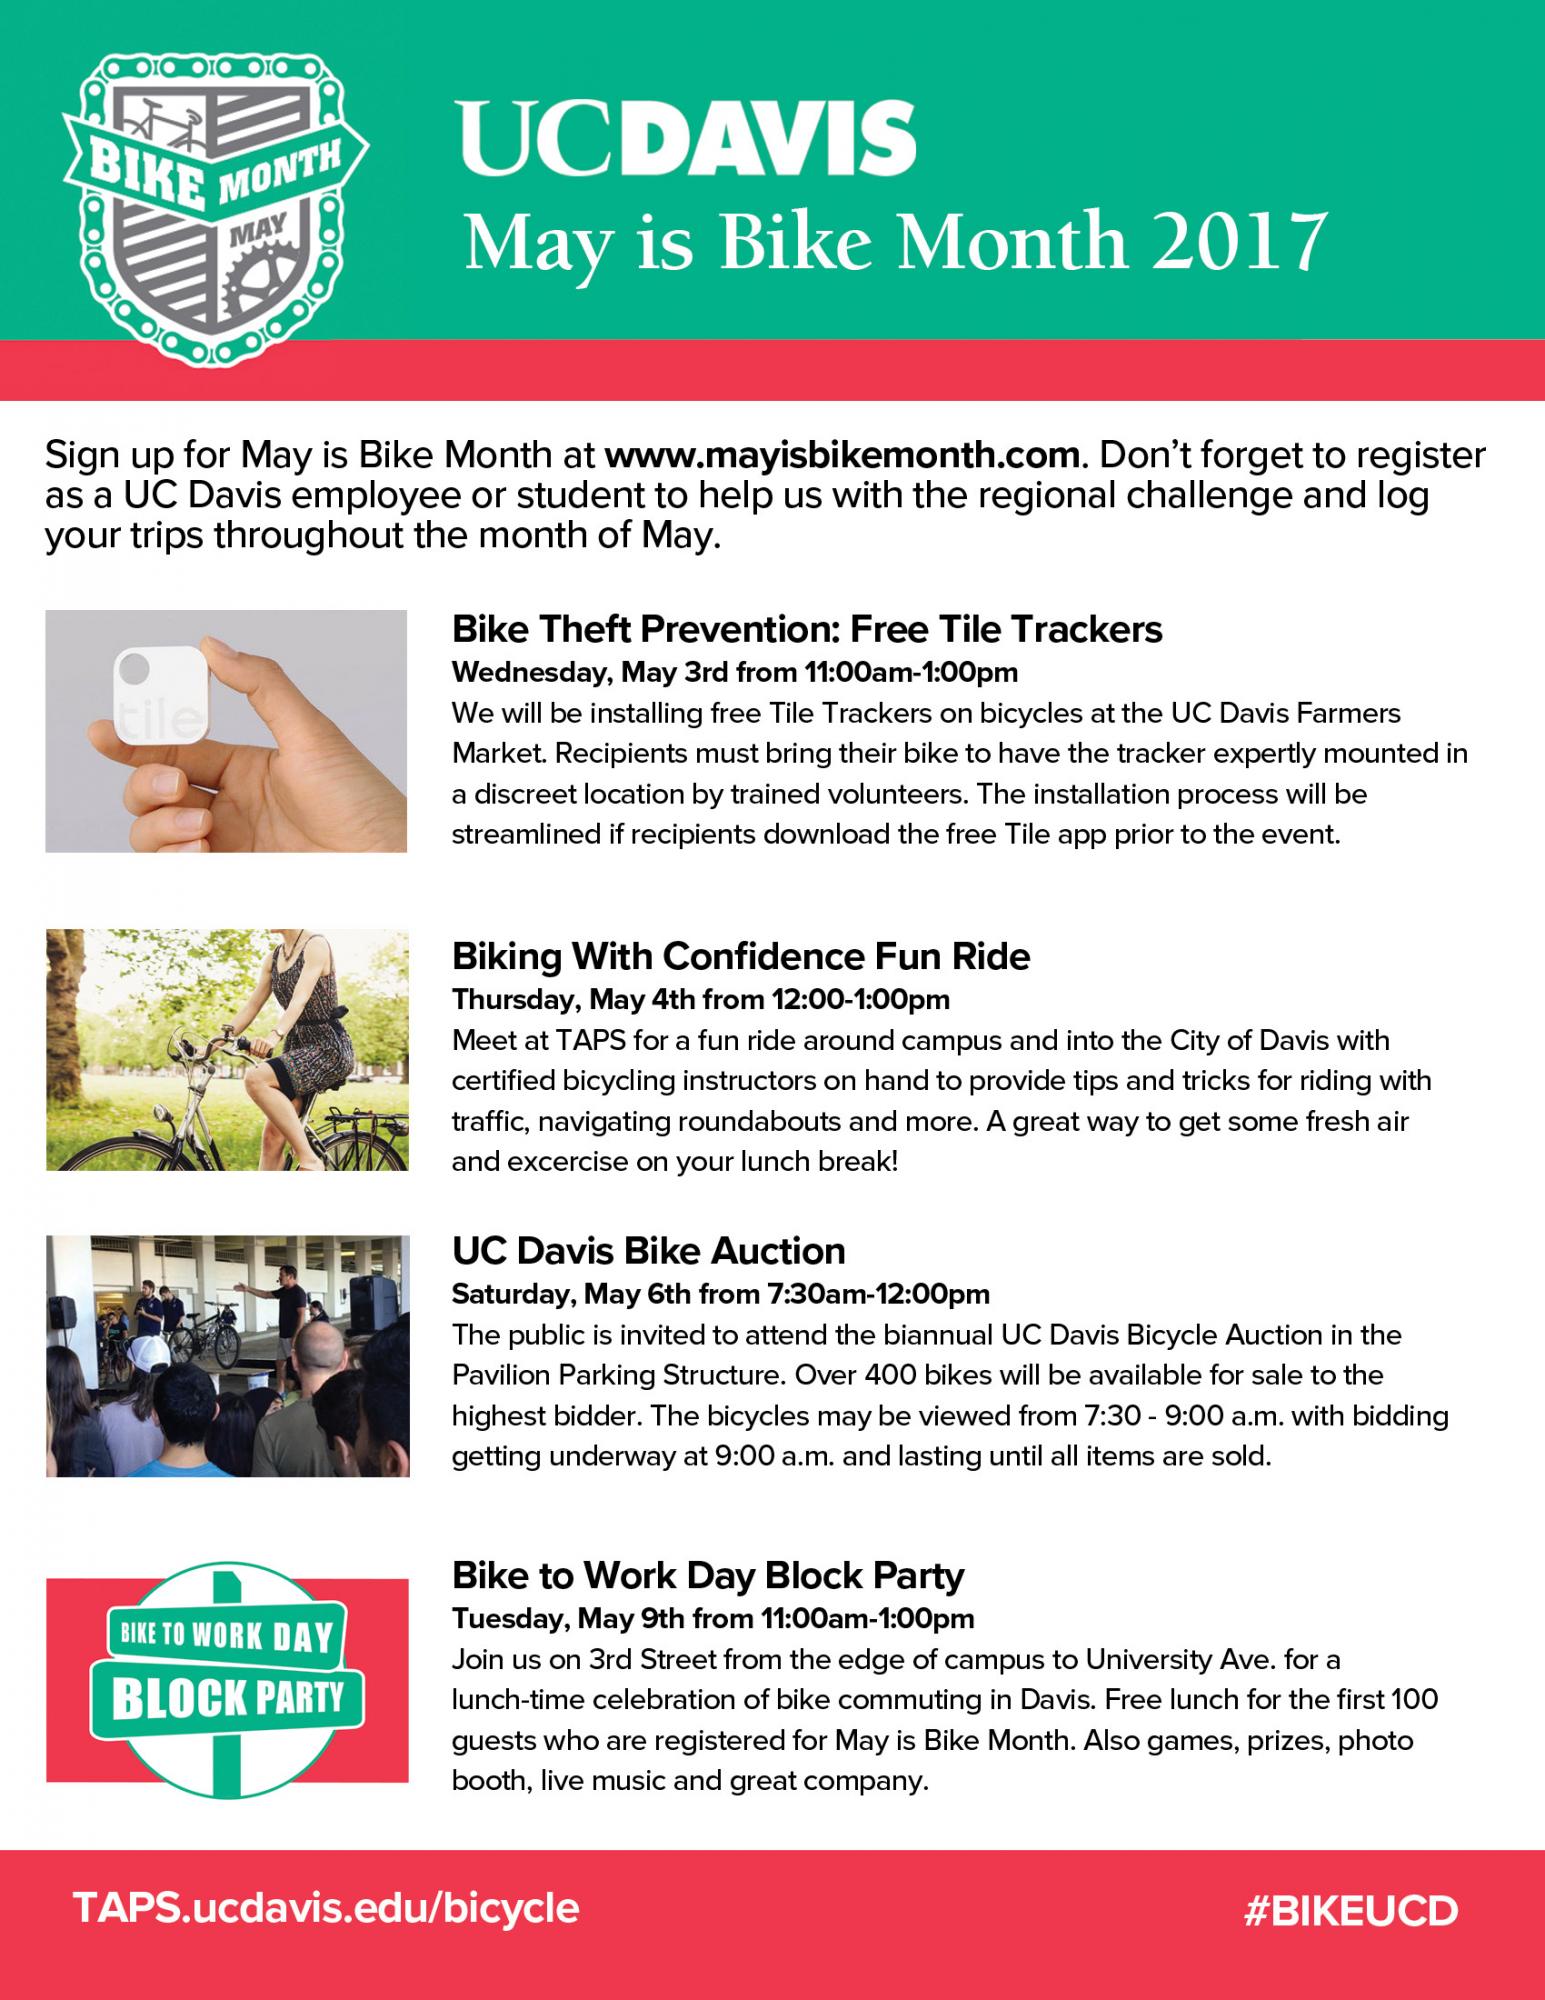 A flier for May is Bike Month activities